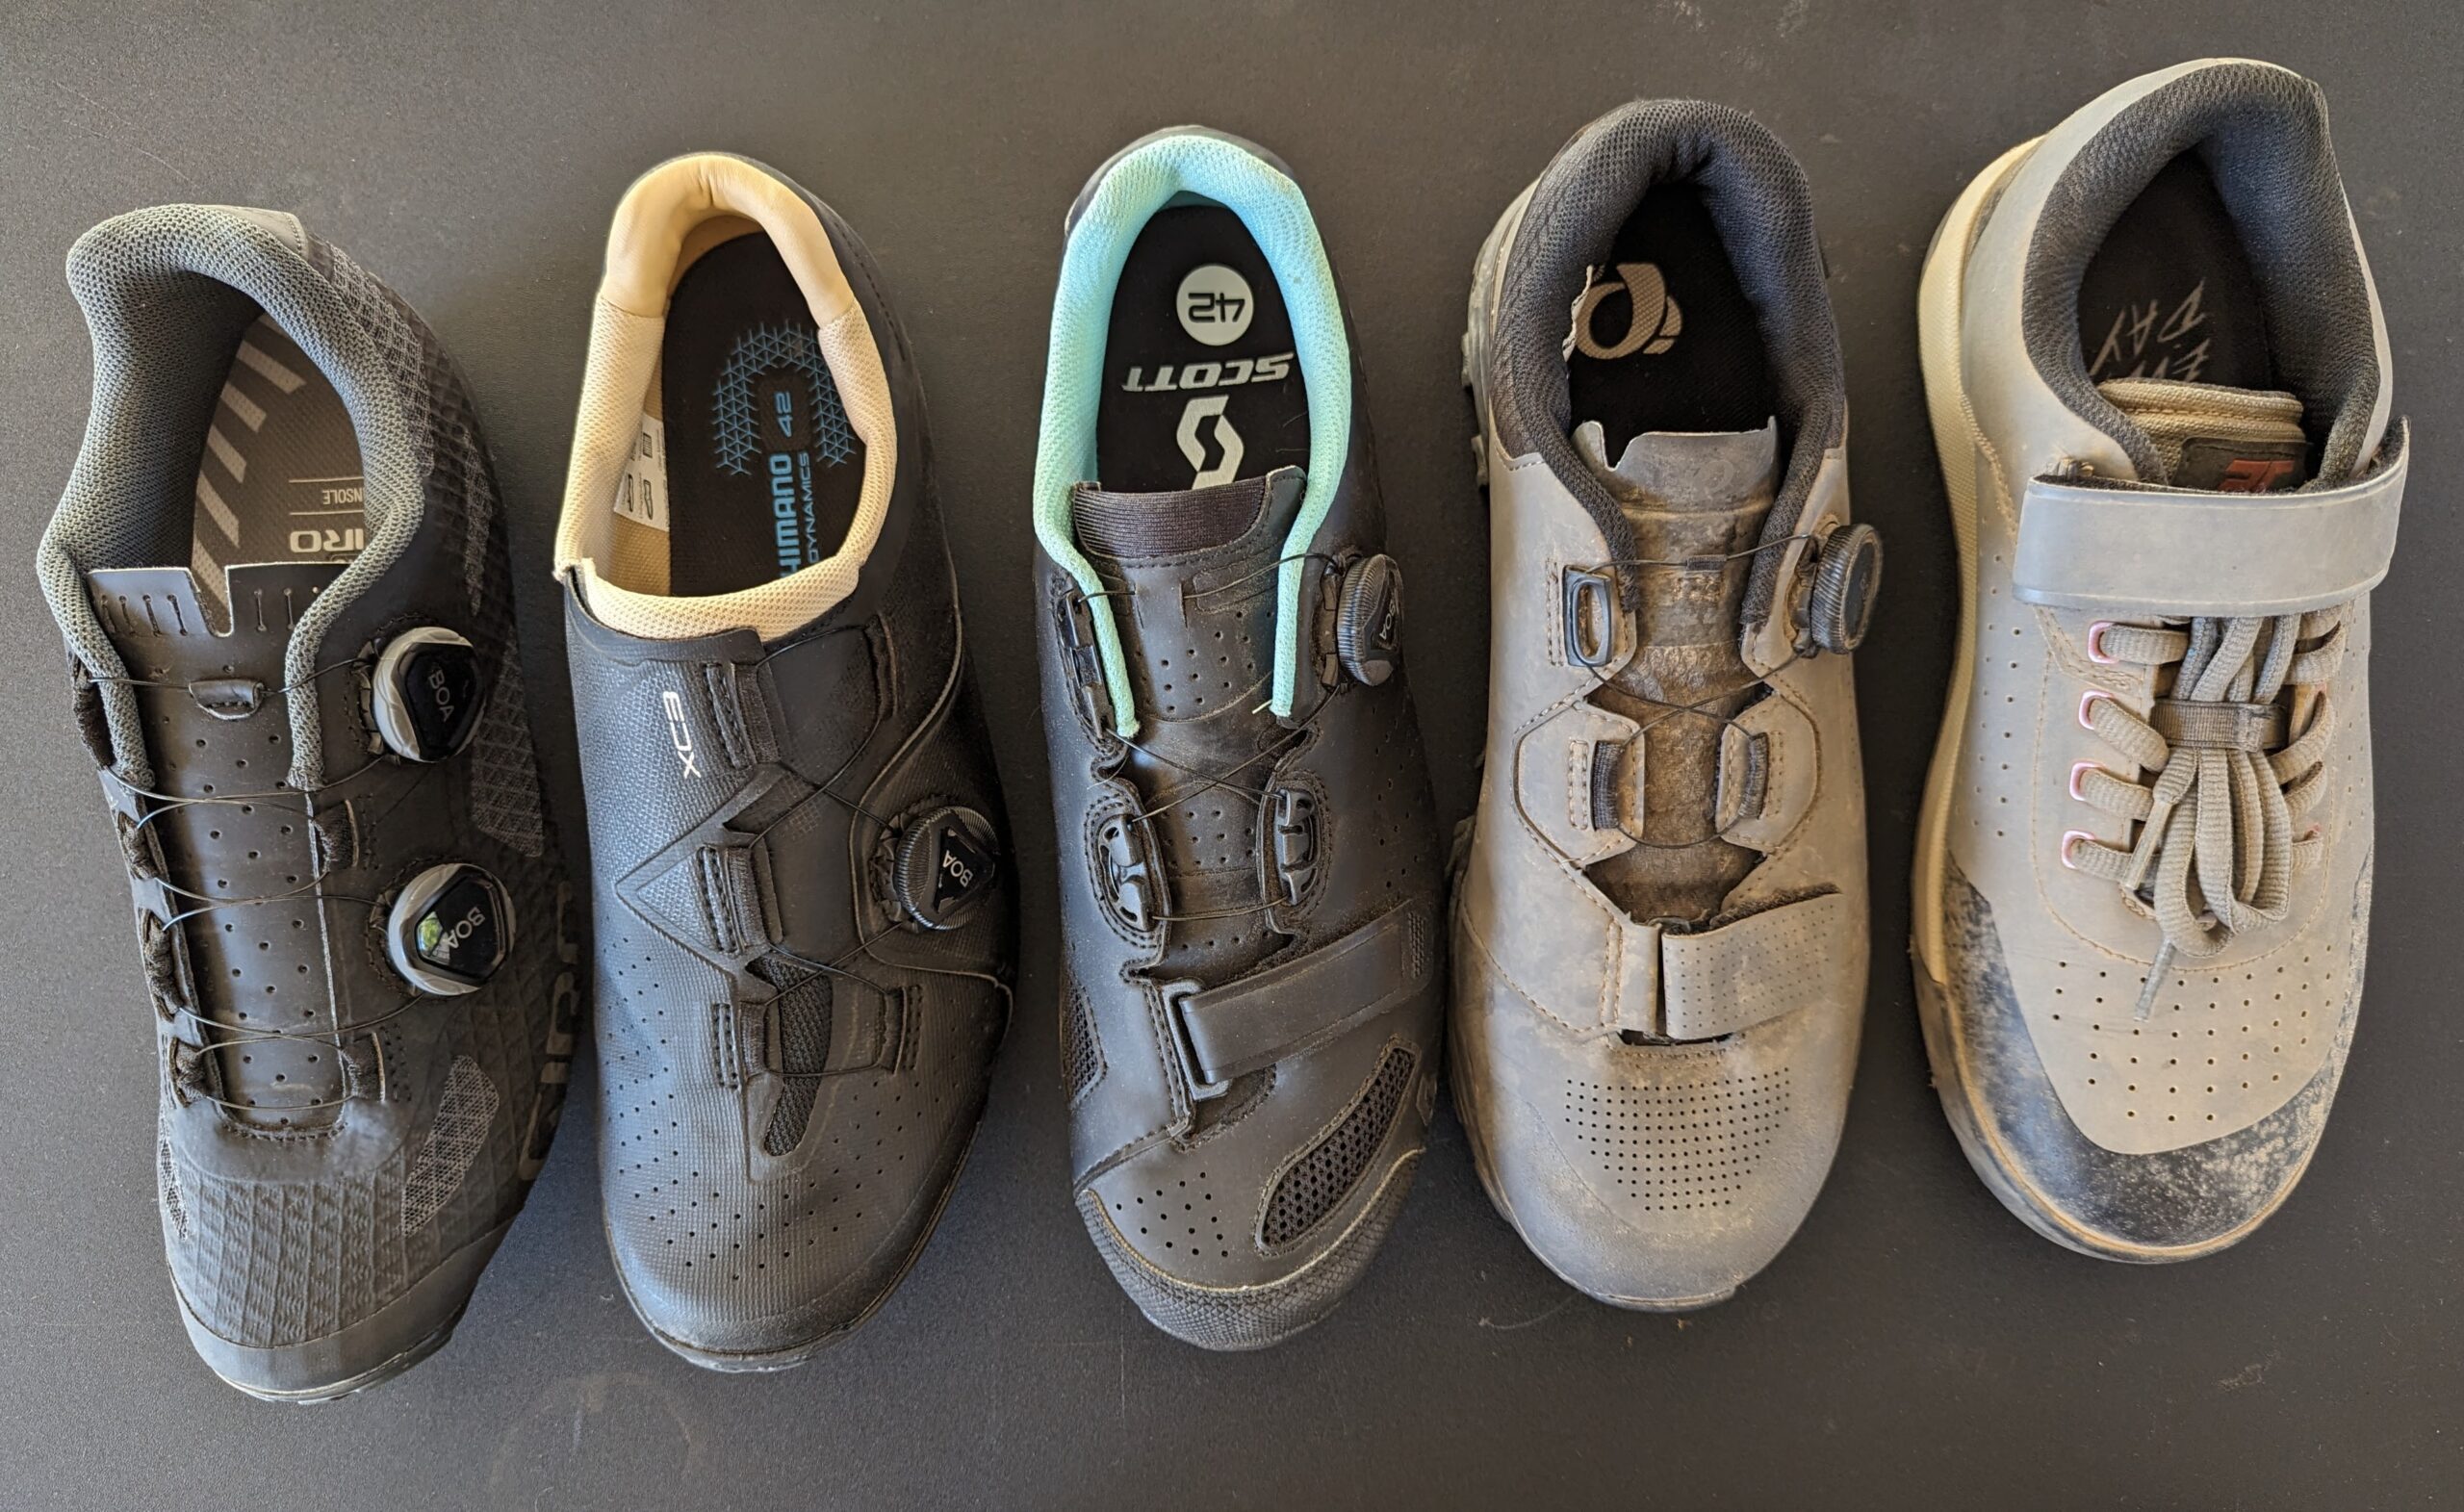 Comparison shot of different closure style on clipless women's mountain bike shoes